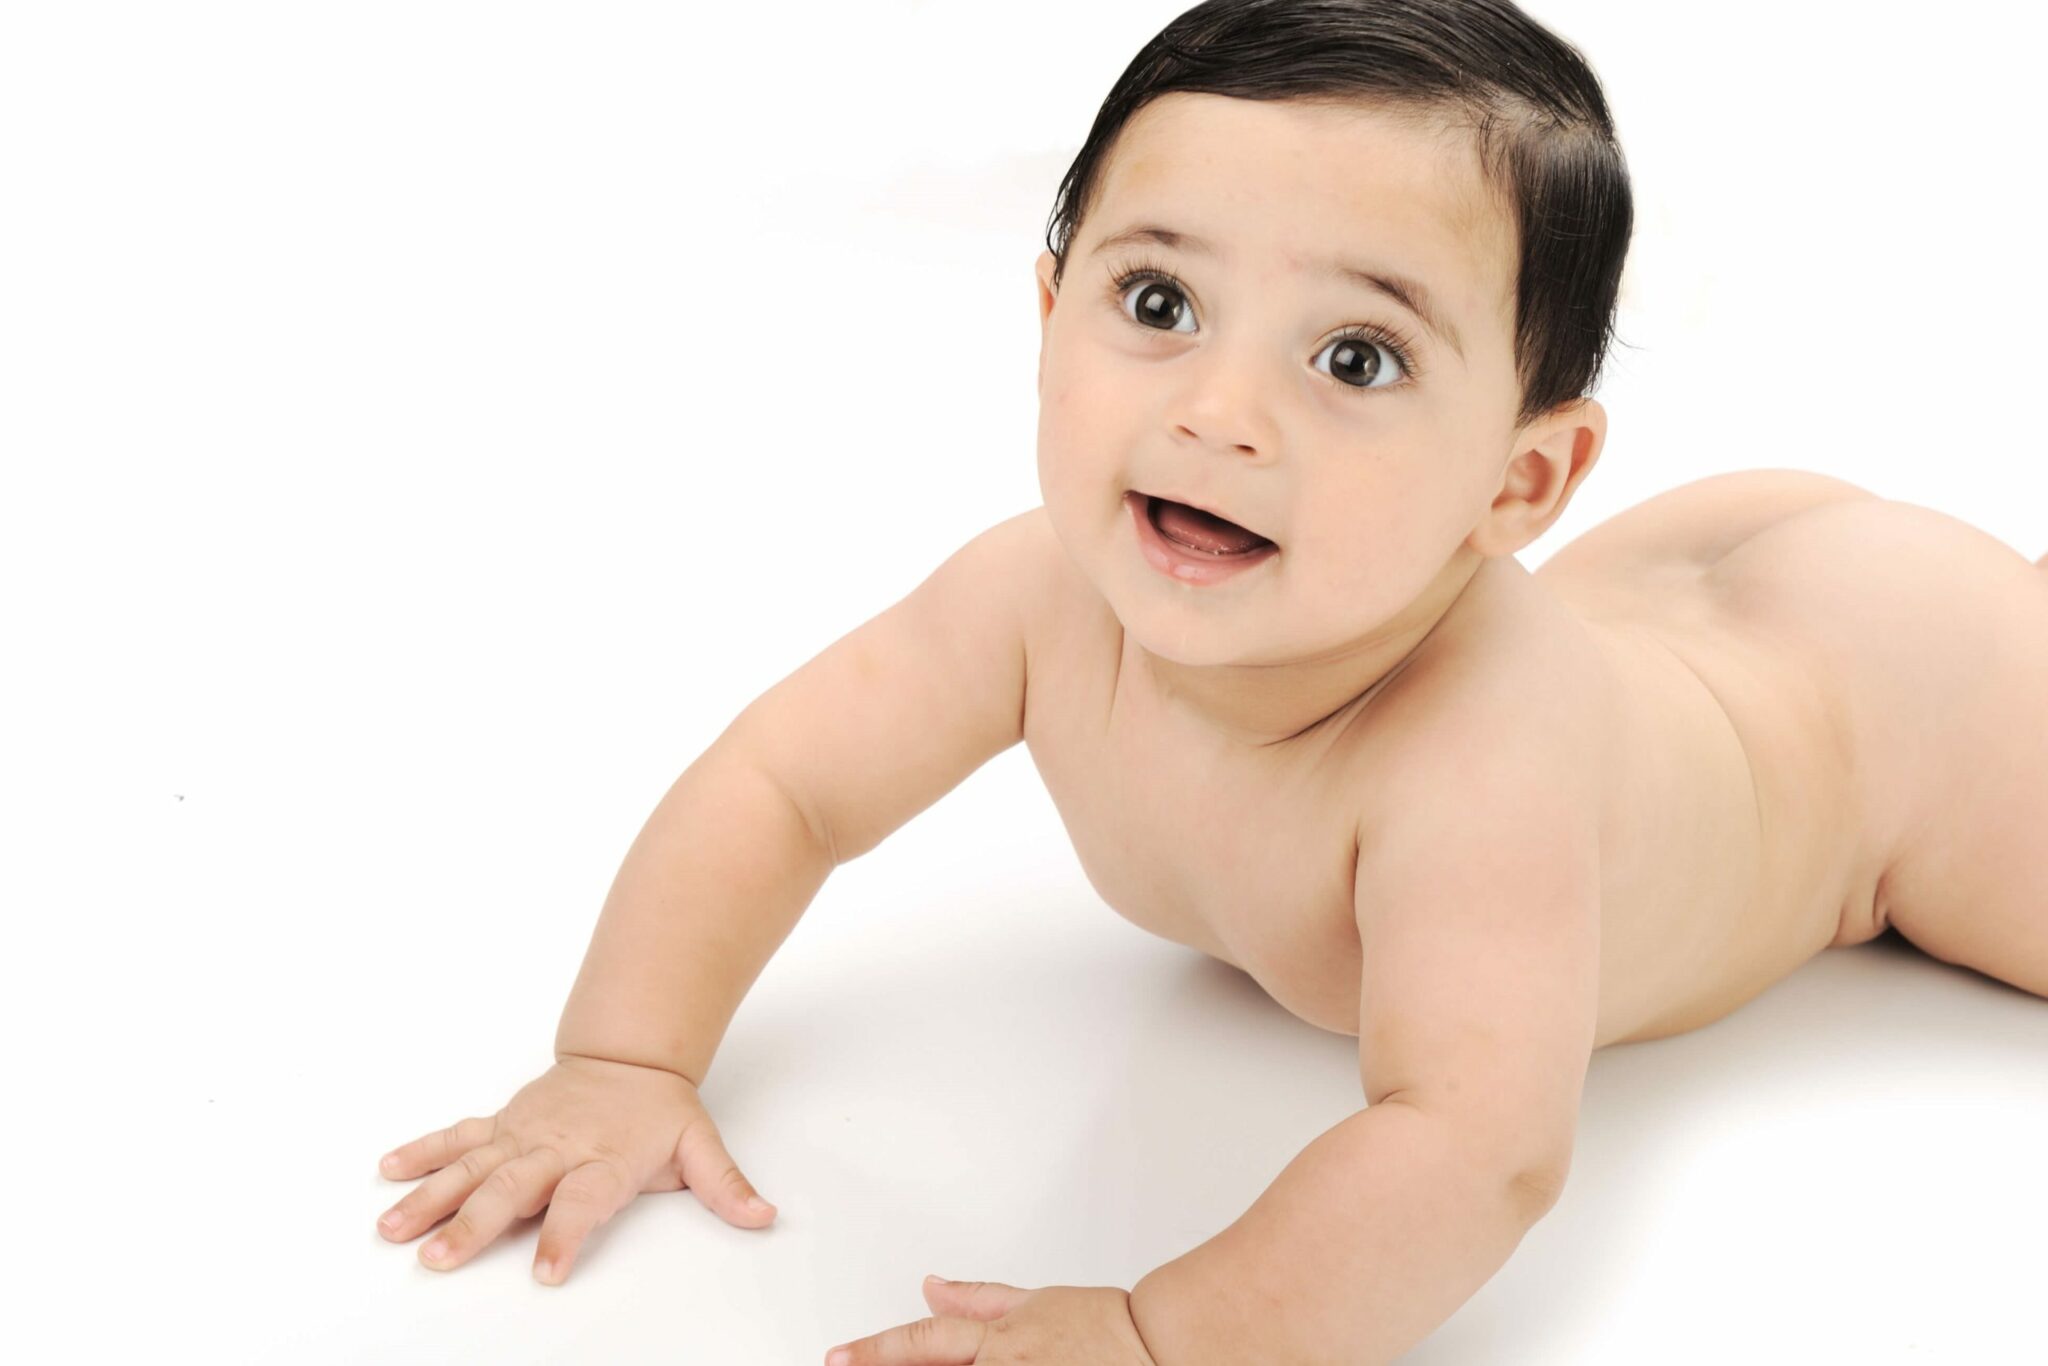 Benefits of Tummy Time, Why Tummy Time is Important